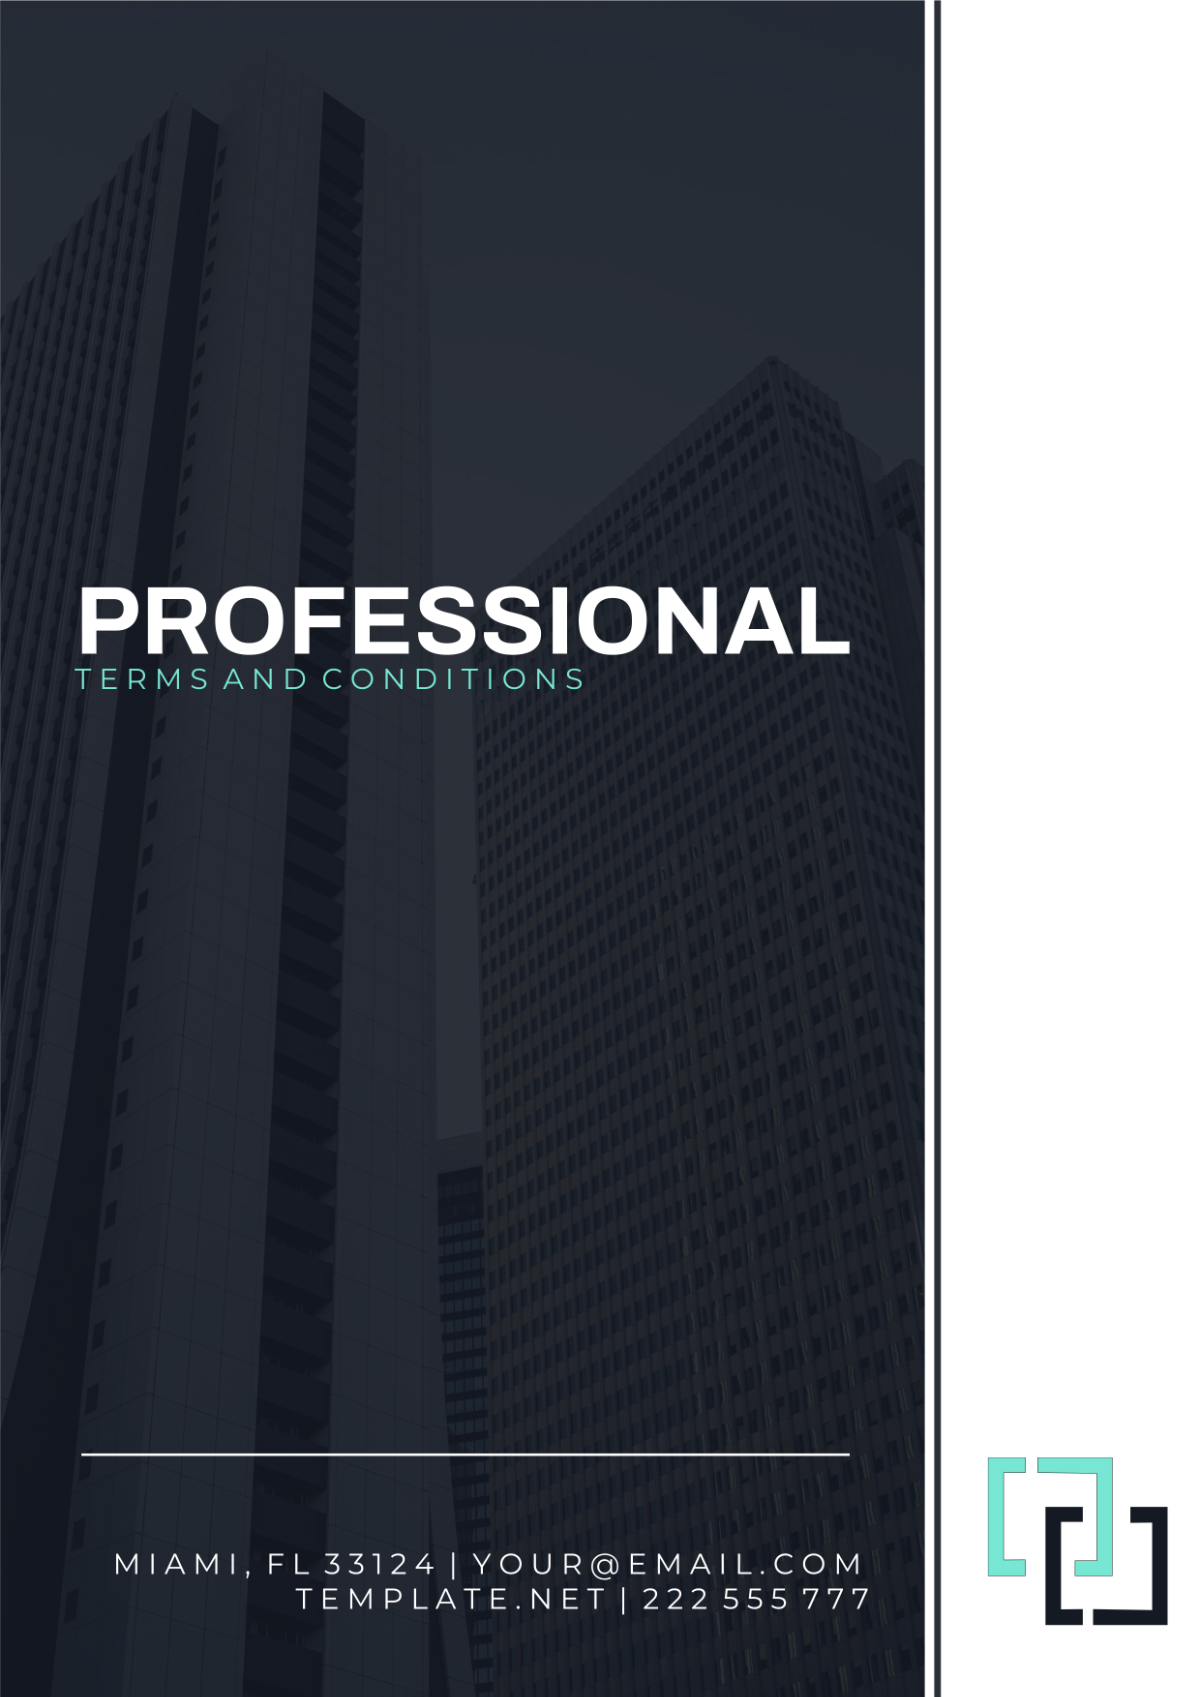 Professional Terms and Conditions Cover Page